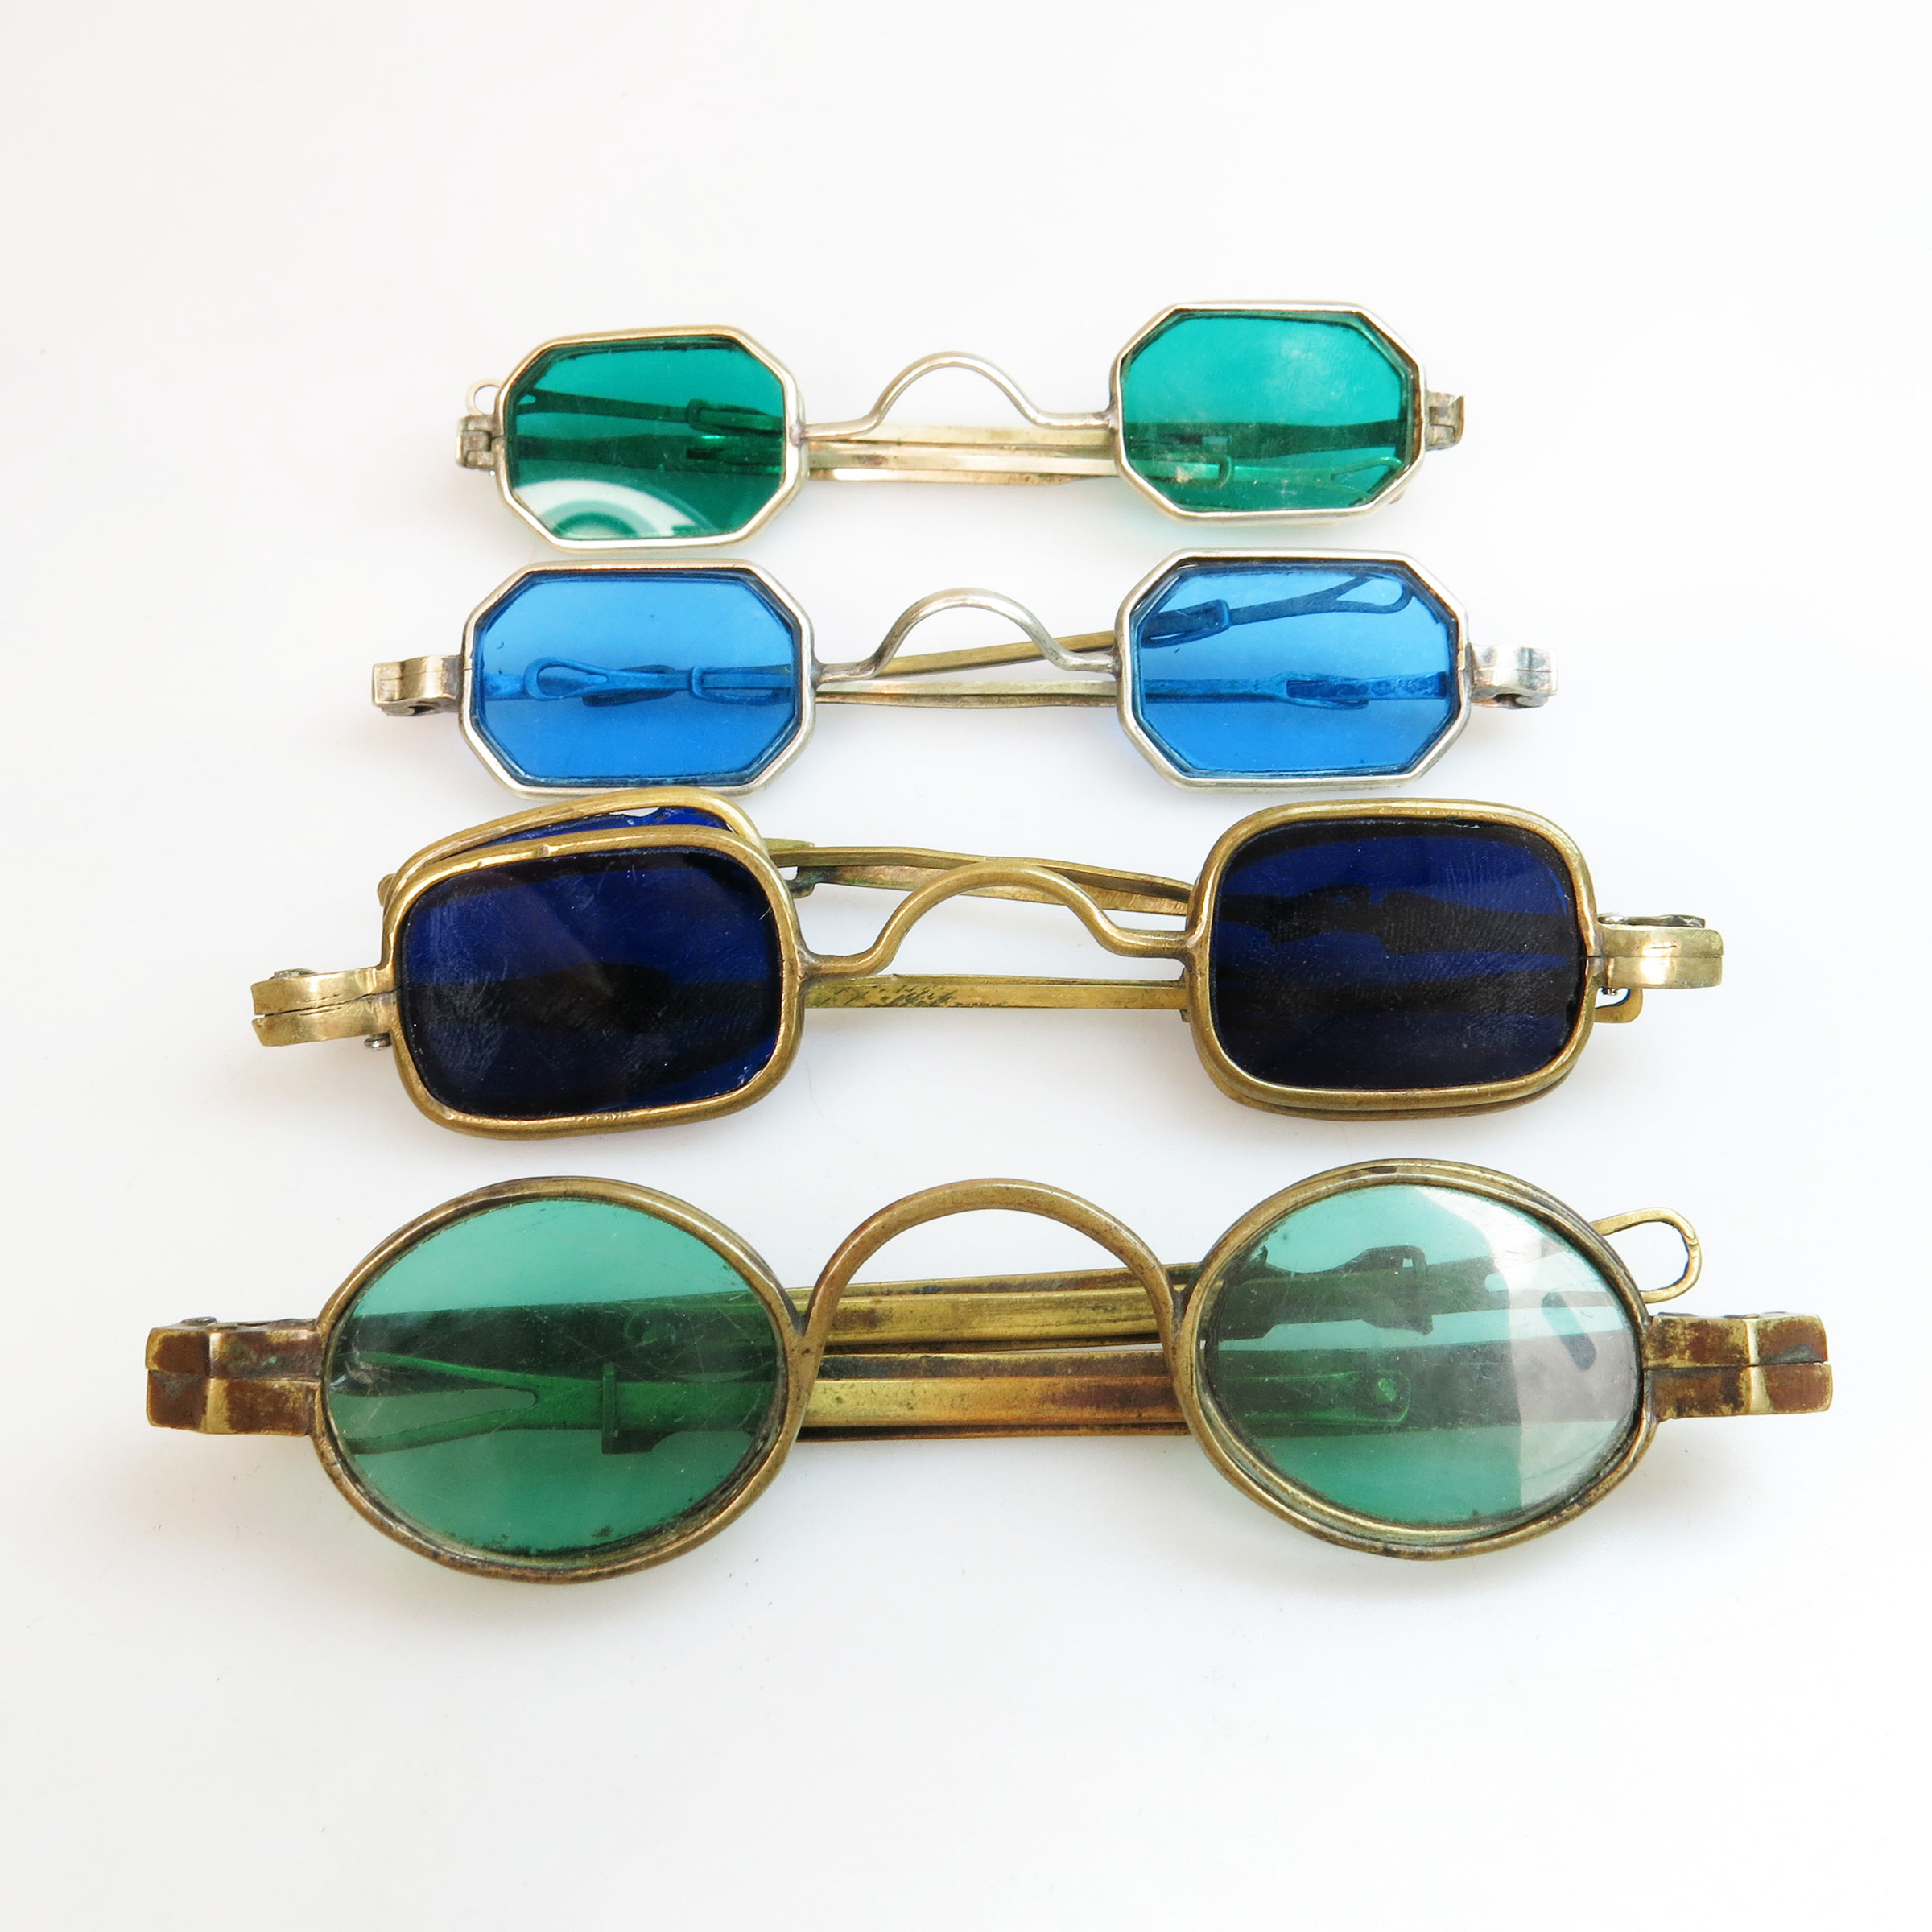 4 Pairs Of 19th Century Brass 4 Lens Spectacles